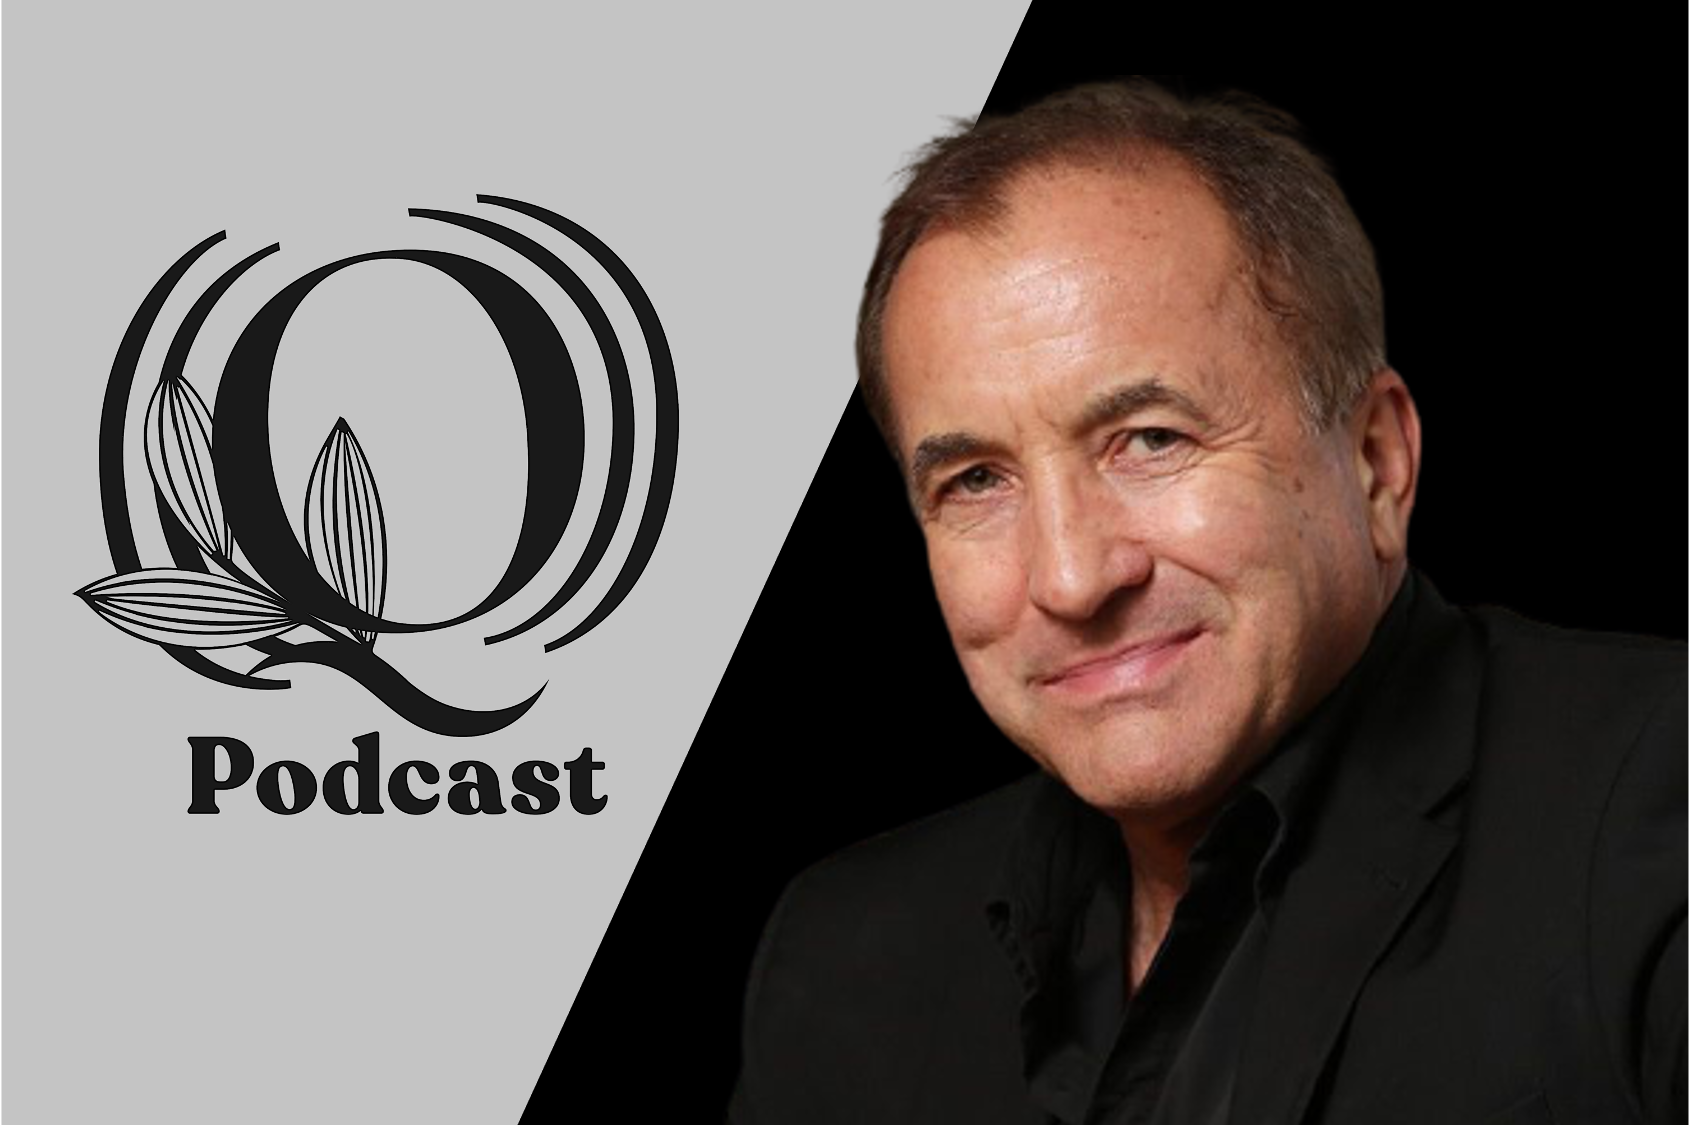 Podcast #153: Michael Shermer on Our Enduring Fascination with UFOs